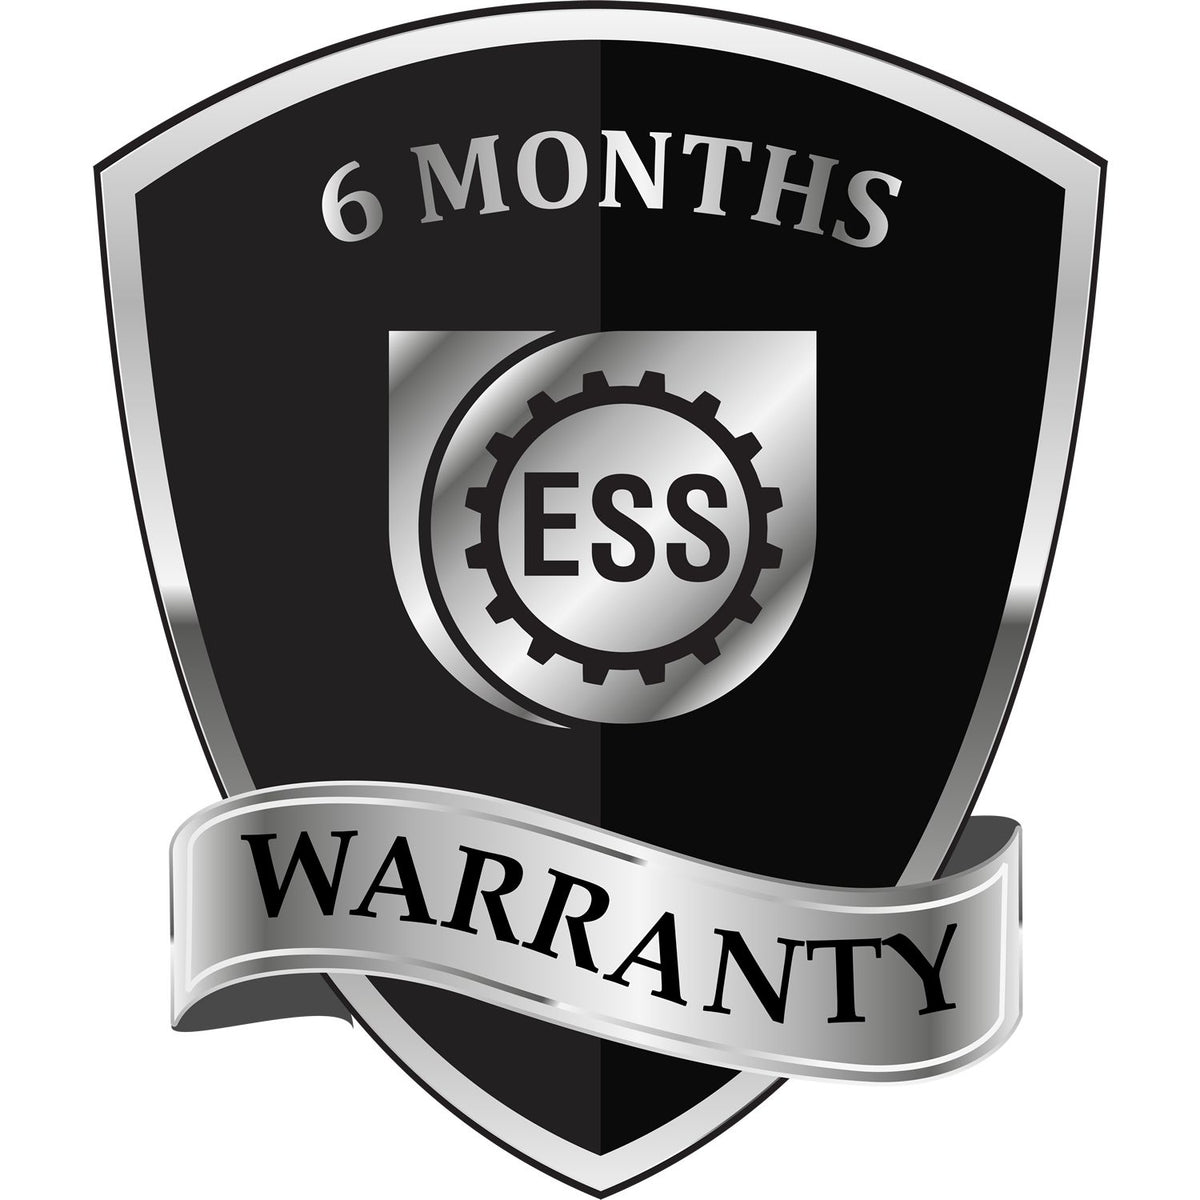 A badge or emblem showing a warranty icon for the Self-Inking Montana PE Stamp